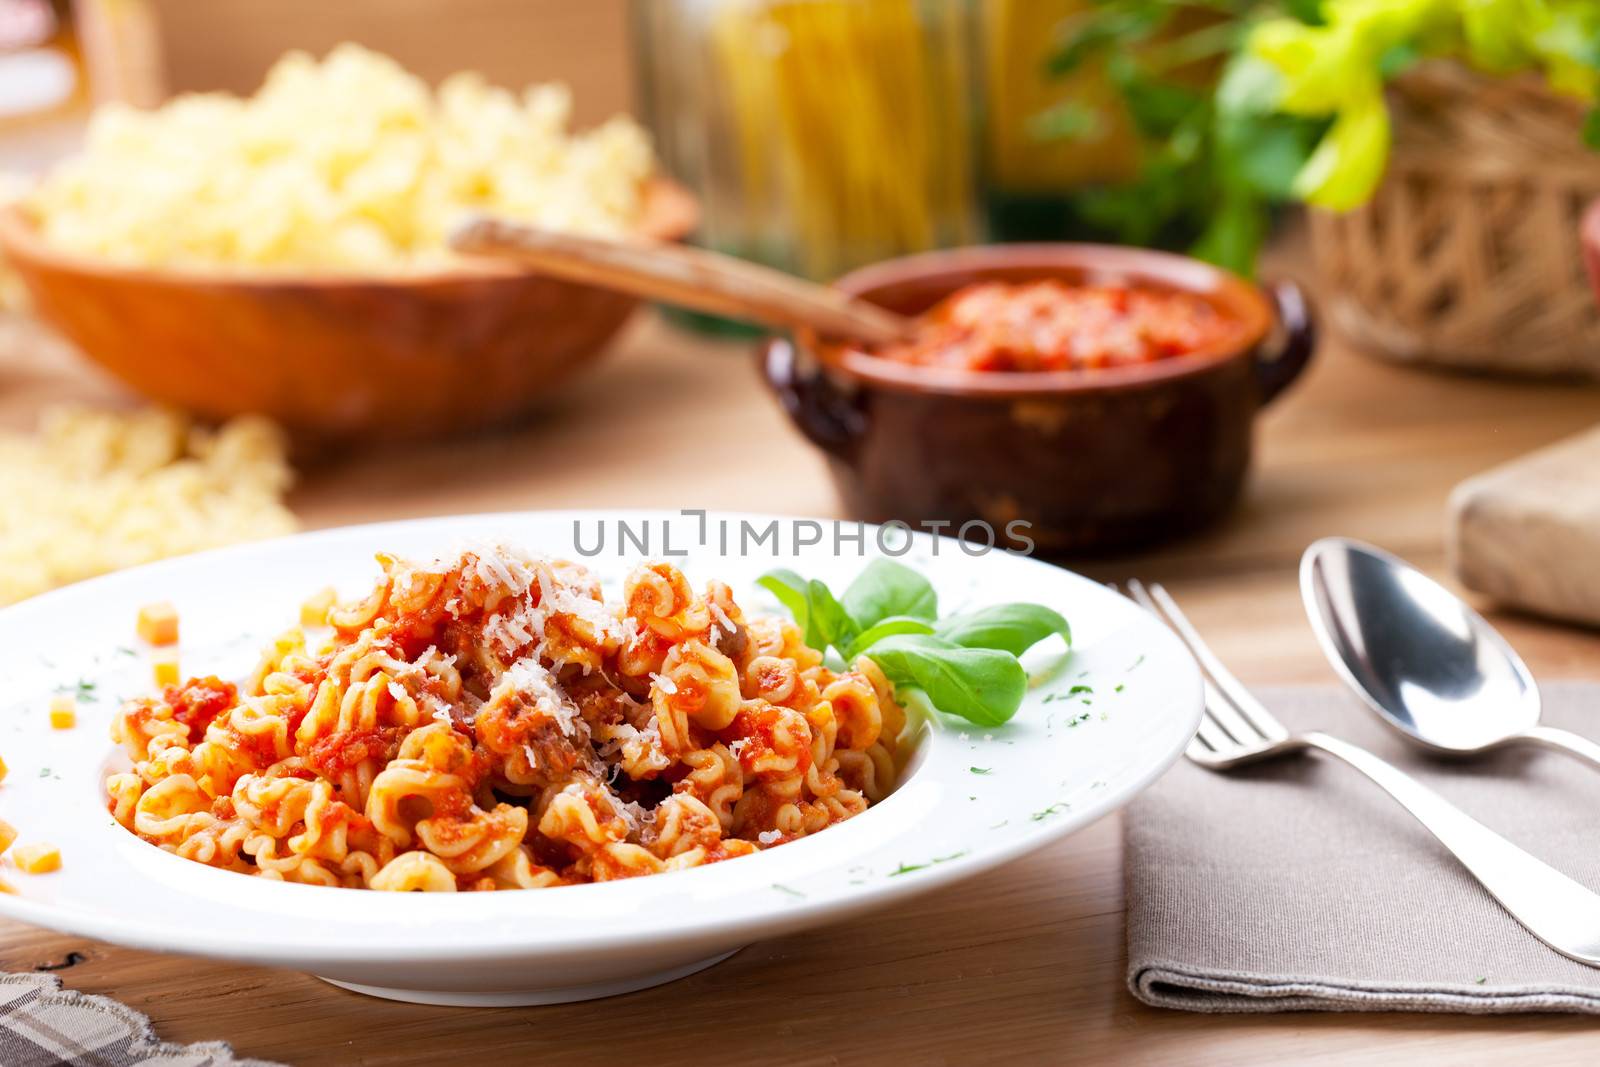 Italian food: pasta with tomato sauce and parmesan cheese.